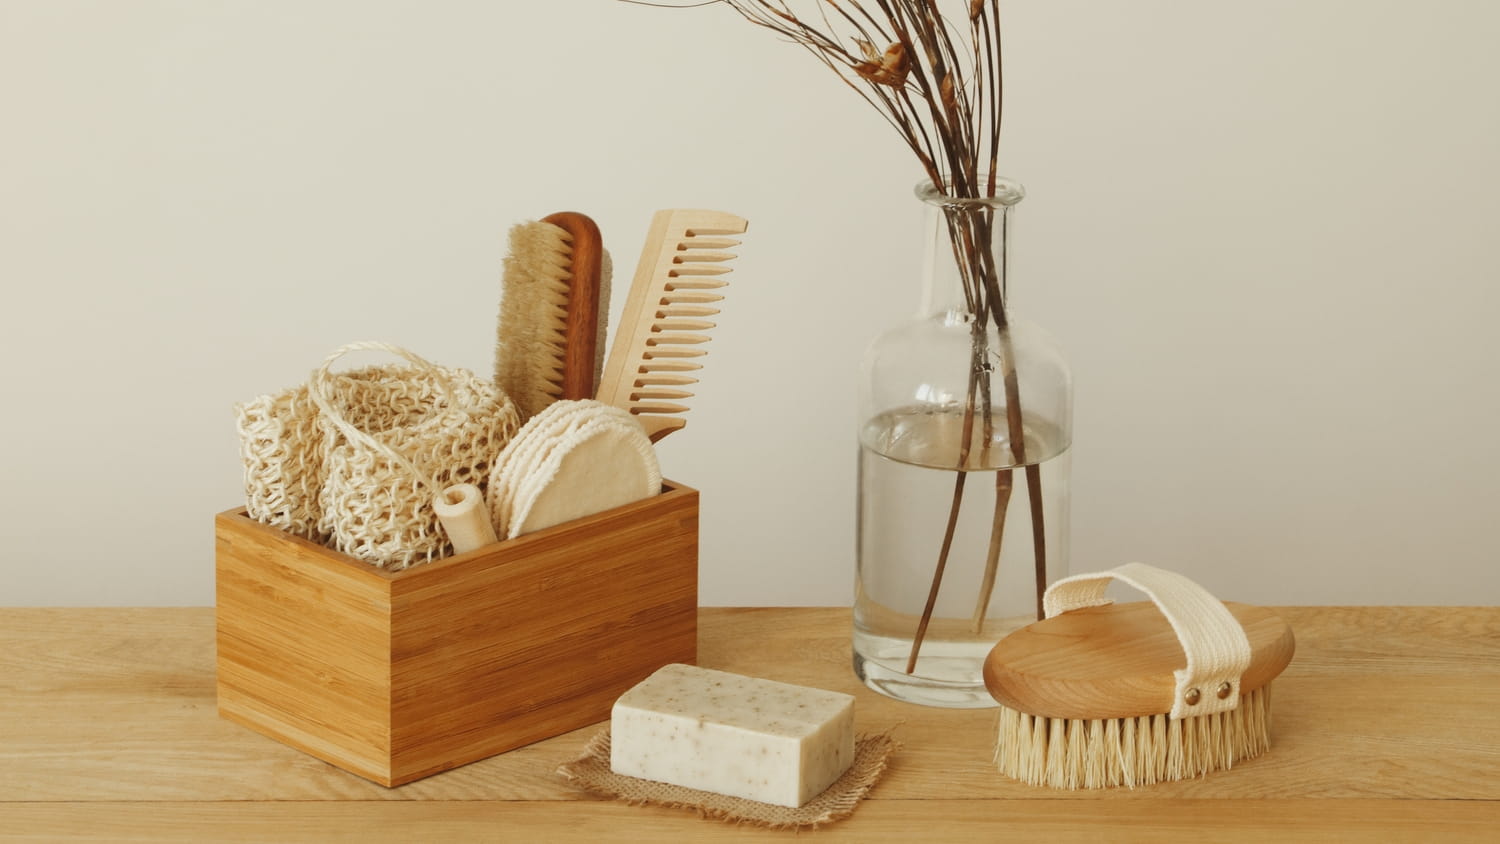 Product line up of sustainable products including brushes, soap and makeup removing pads.